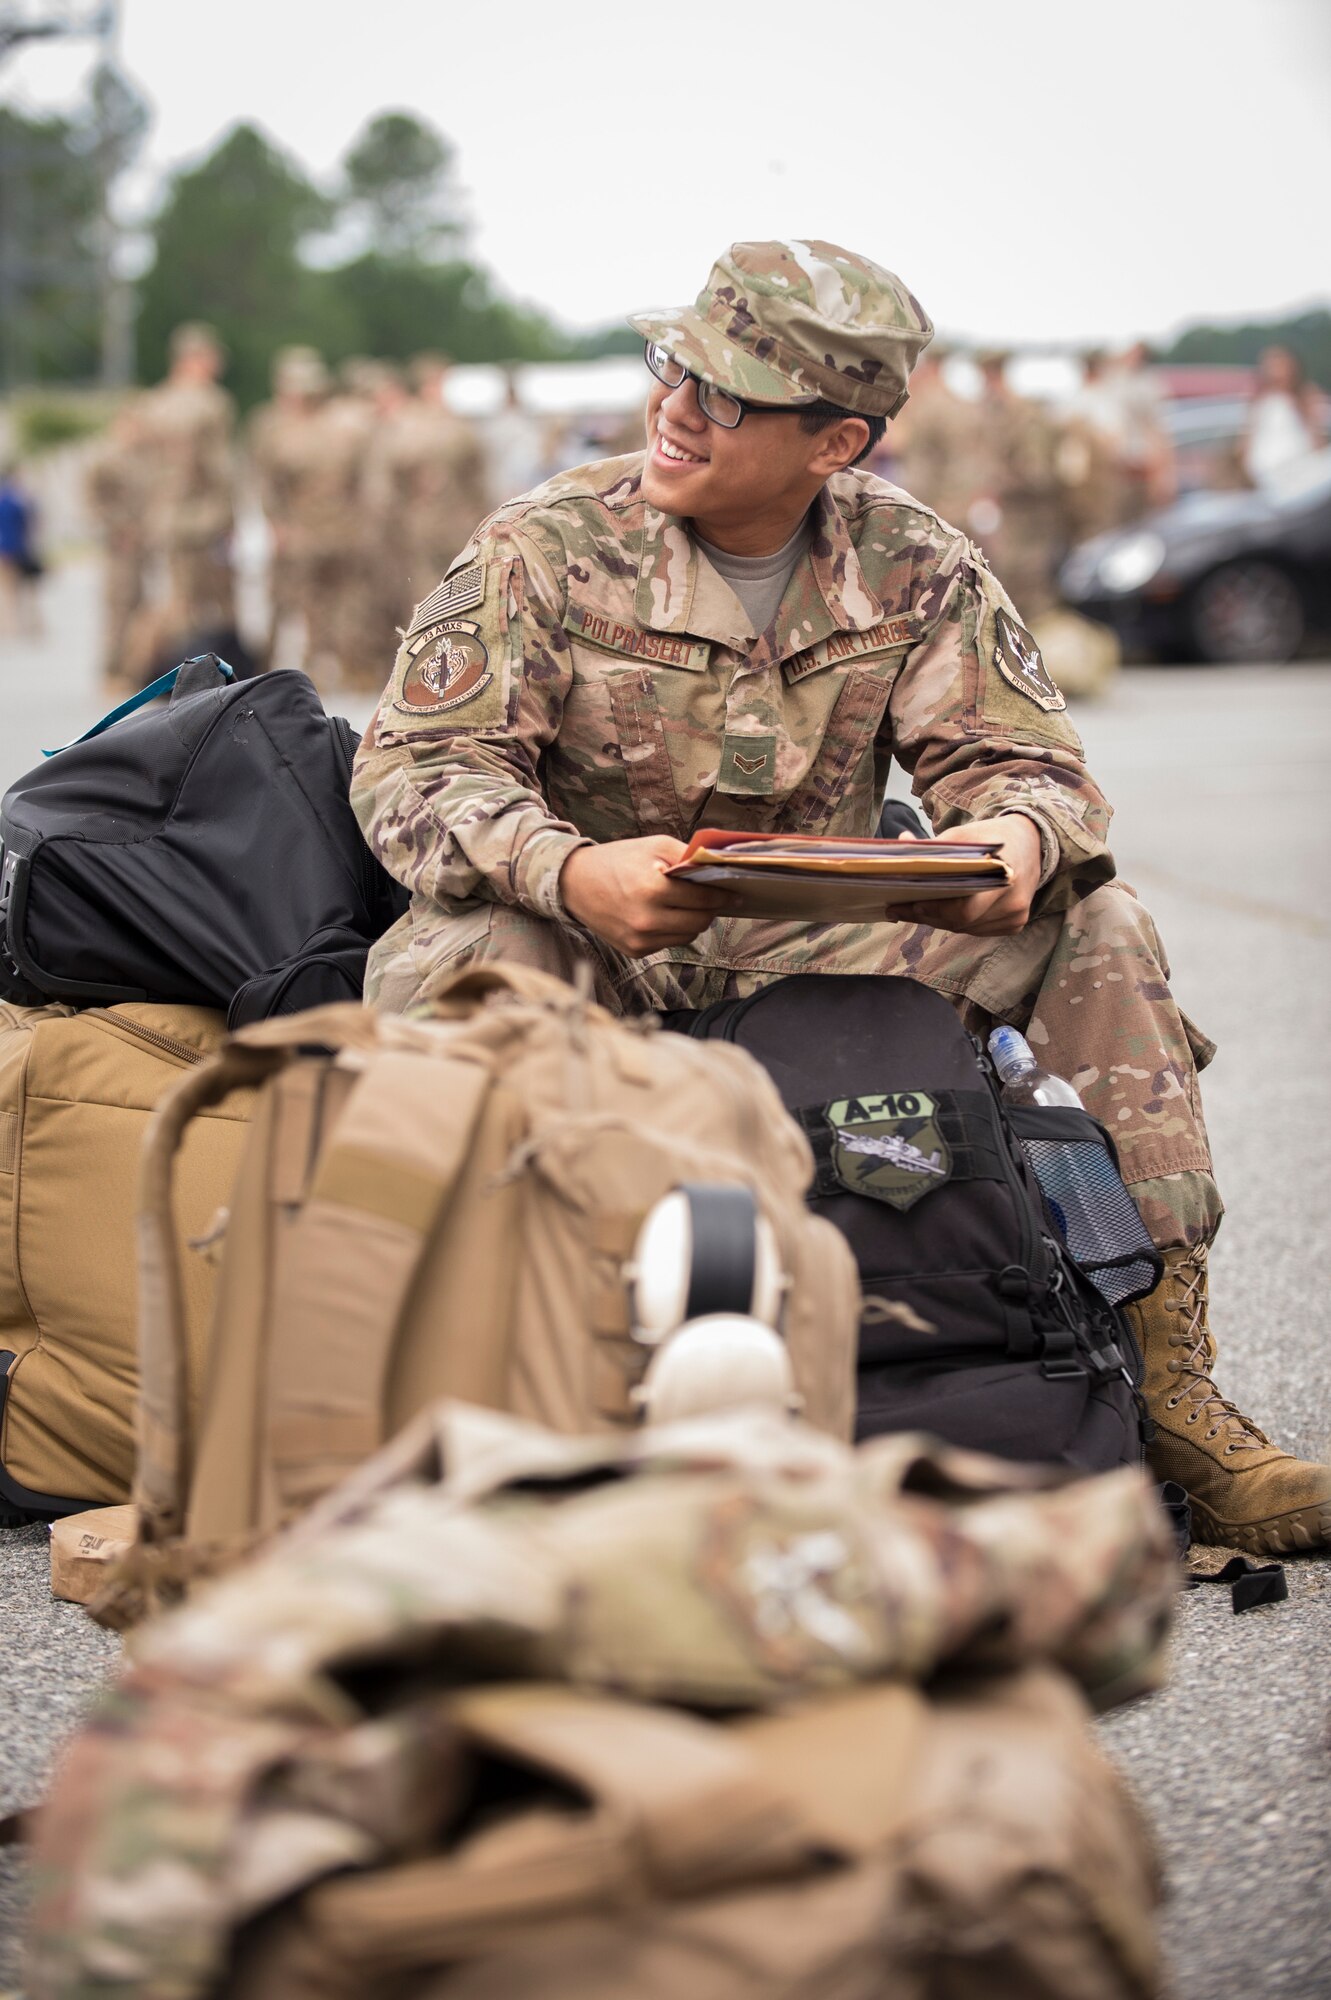 Airman 1st Class Michael Polprasert, 23d Aircraft Maintenance Squadron, sits on his luggage prior to a deployment, July 8, 2018, at Moody Air Force Base, Ga. Airmen from the 75th Fighter Squadron (FS) and supporting units deployed to an undisclosed location in support of Operation Spartan Shield. (U.S. Air Force photo by Andrea Jenkins)